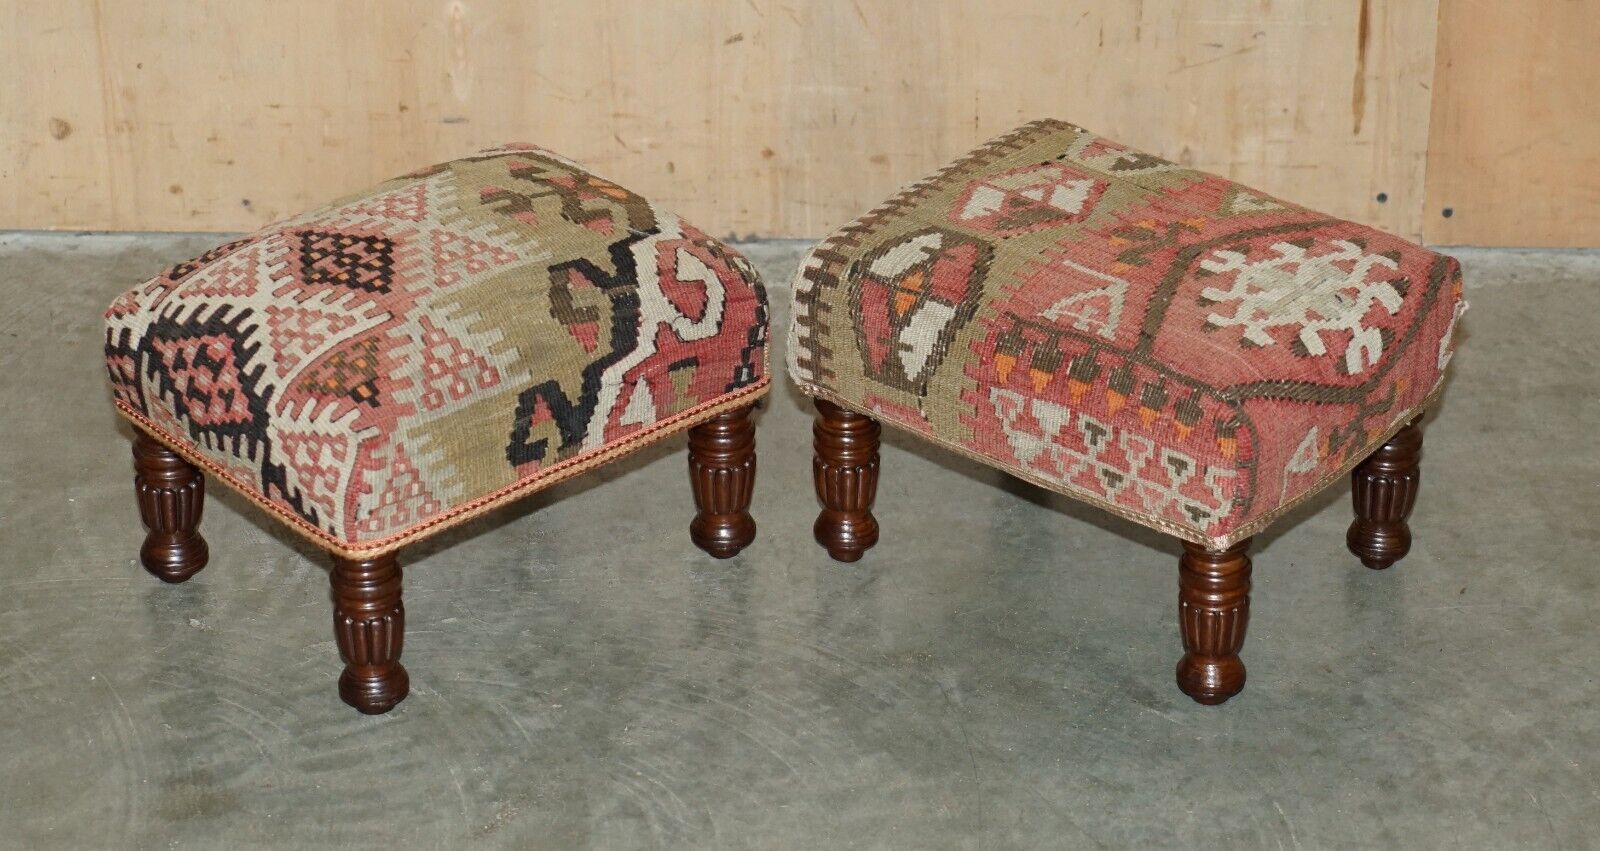 PAIR OF ANTIQUE VICTORIAN KILIM UPHOLSTERED WINGBACK ARMCHAIR FOOTSTOOLS